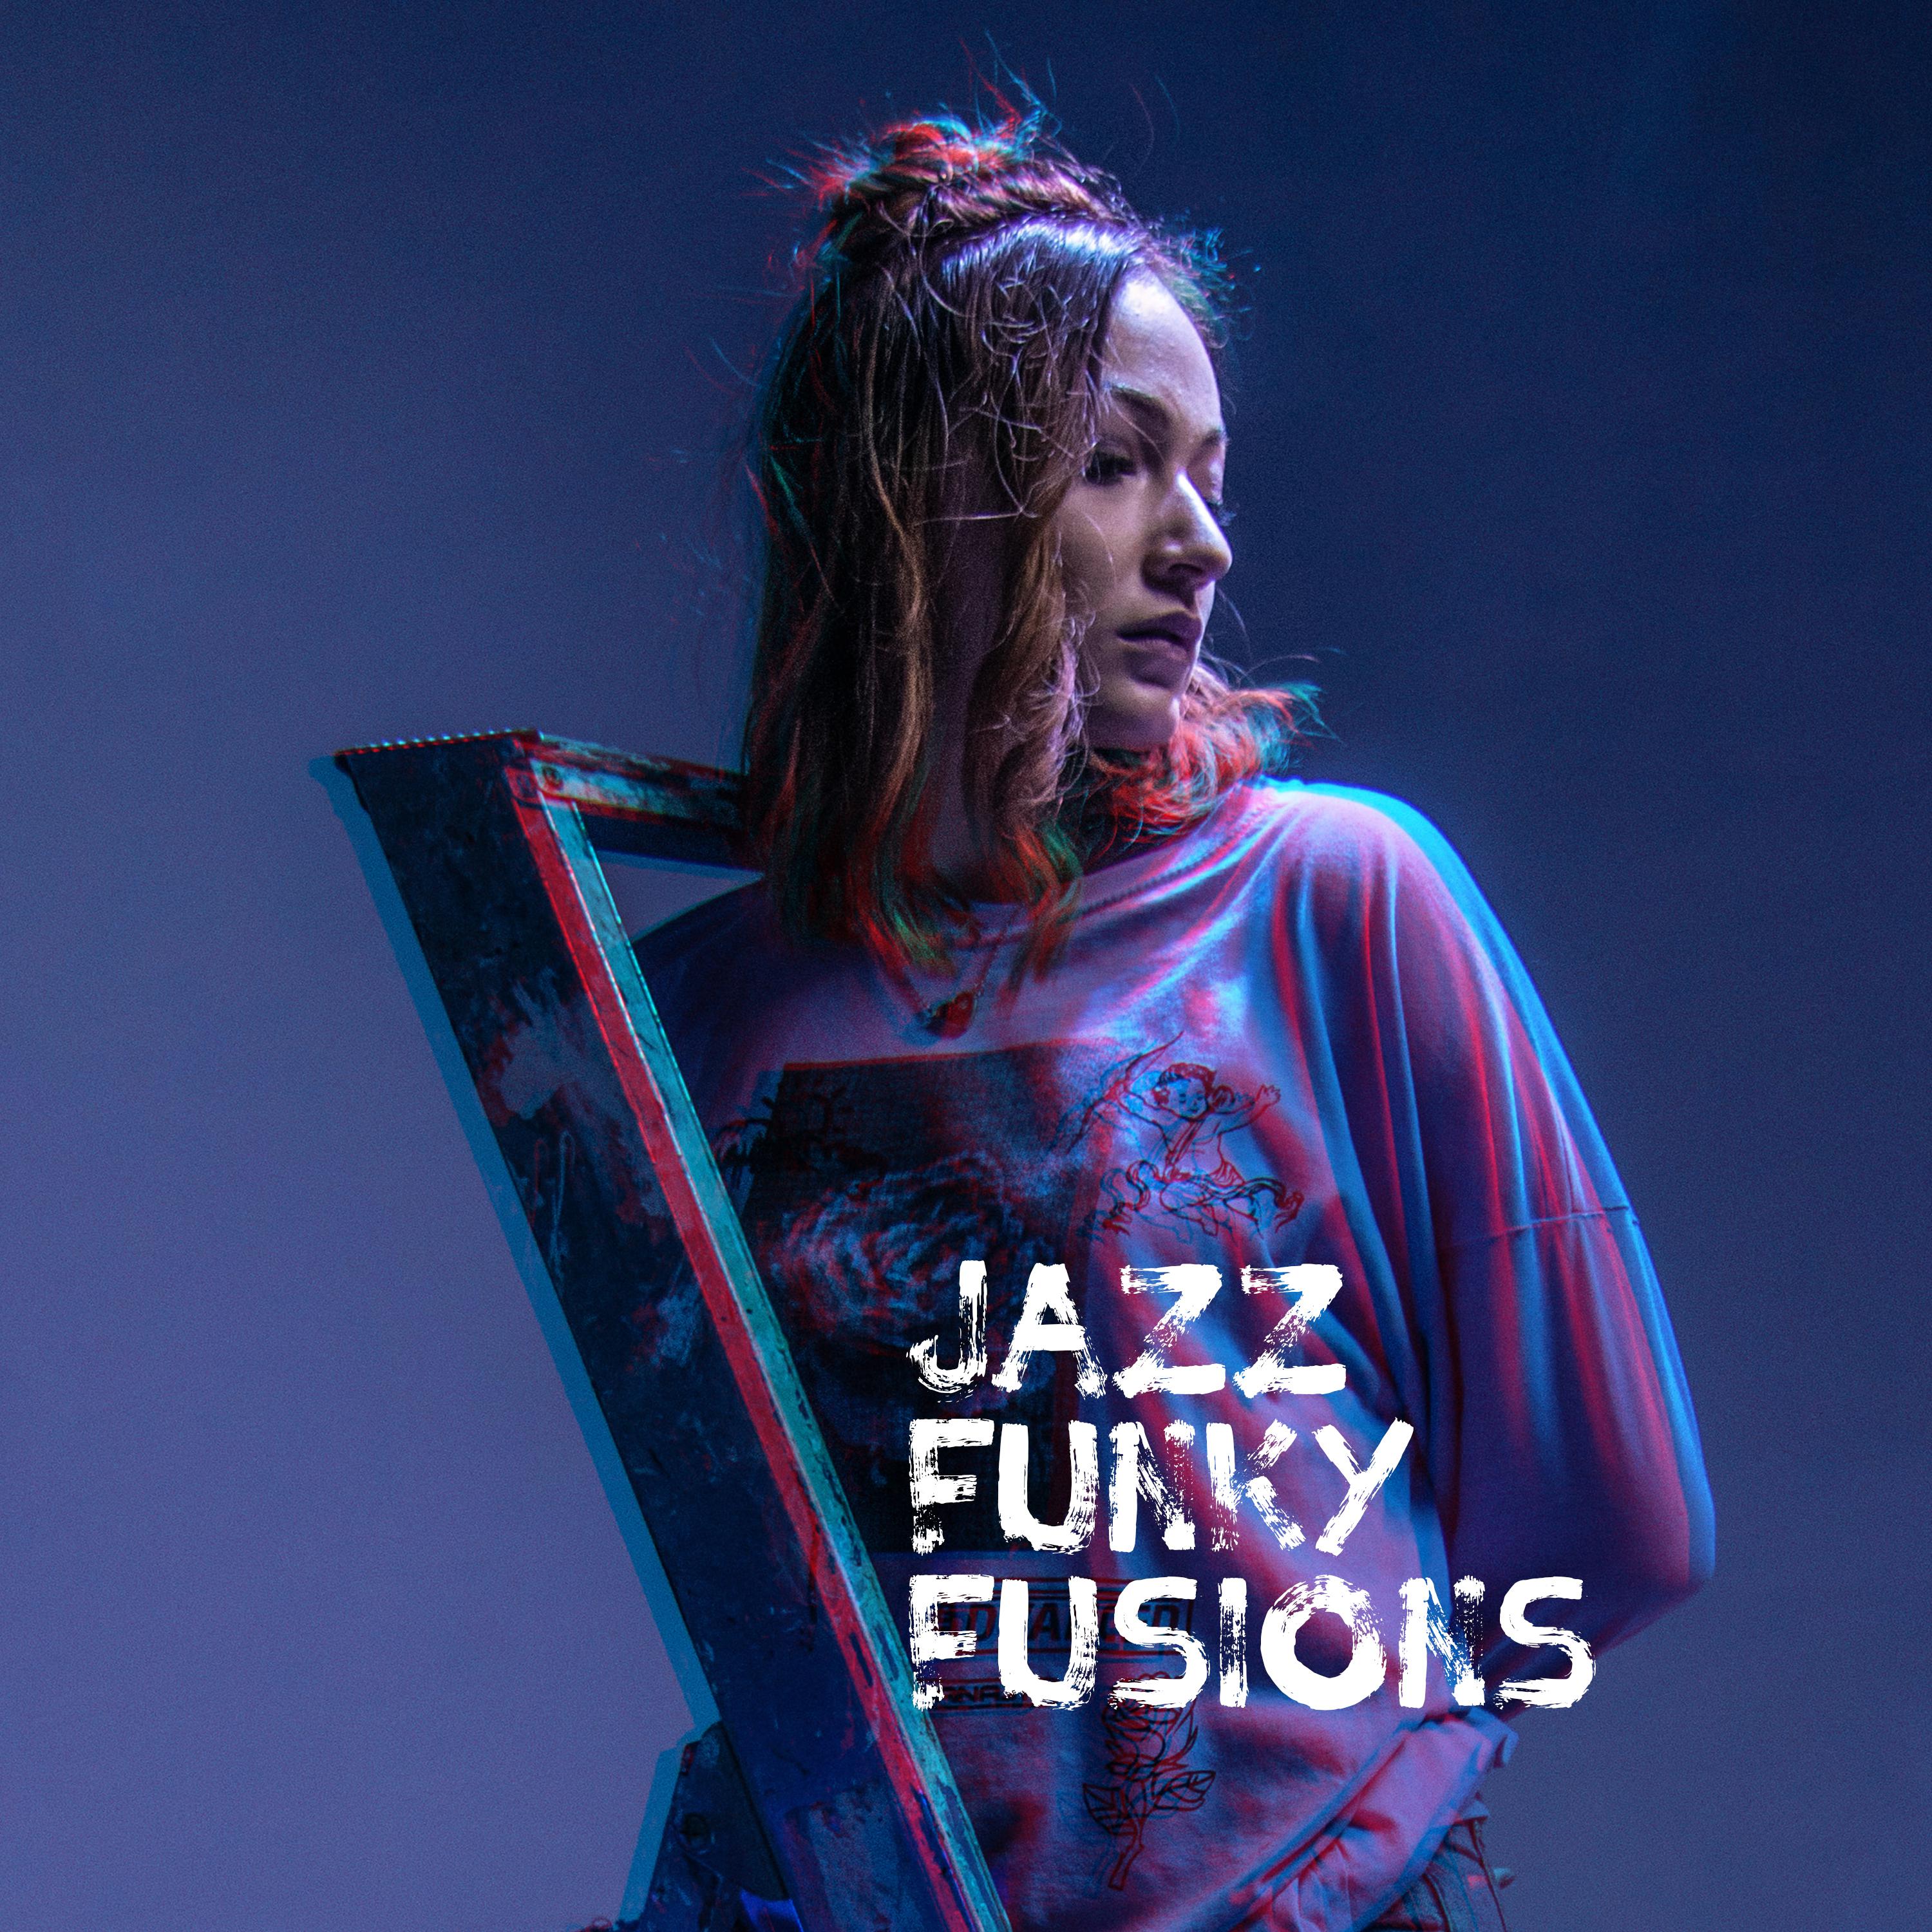 Jazz Funky Fusions: 2019 Modern Smooth Jazz Music Mix, Perfect Album for Restaurant, Elegant Cafe or Hotel Lounge, Funky Jazz Positive Rhythms